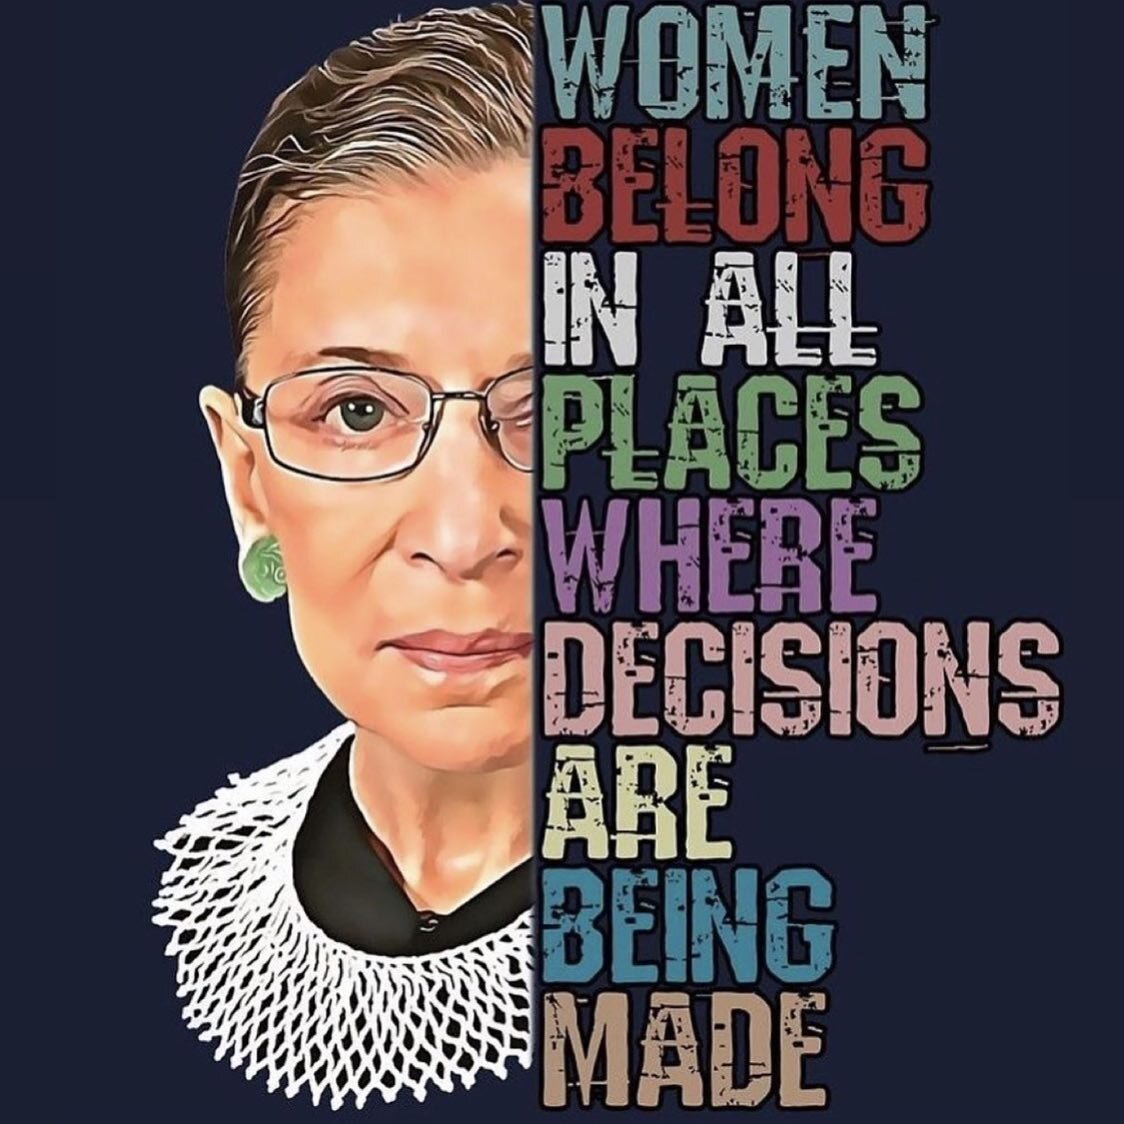 &ldquo;Women belong in all places where decisions are being made &ldquo; An inspiration. RIP 🦋